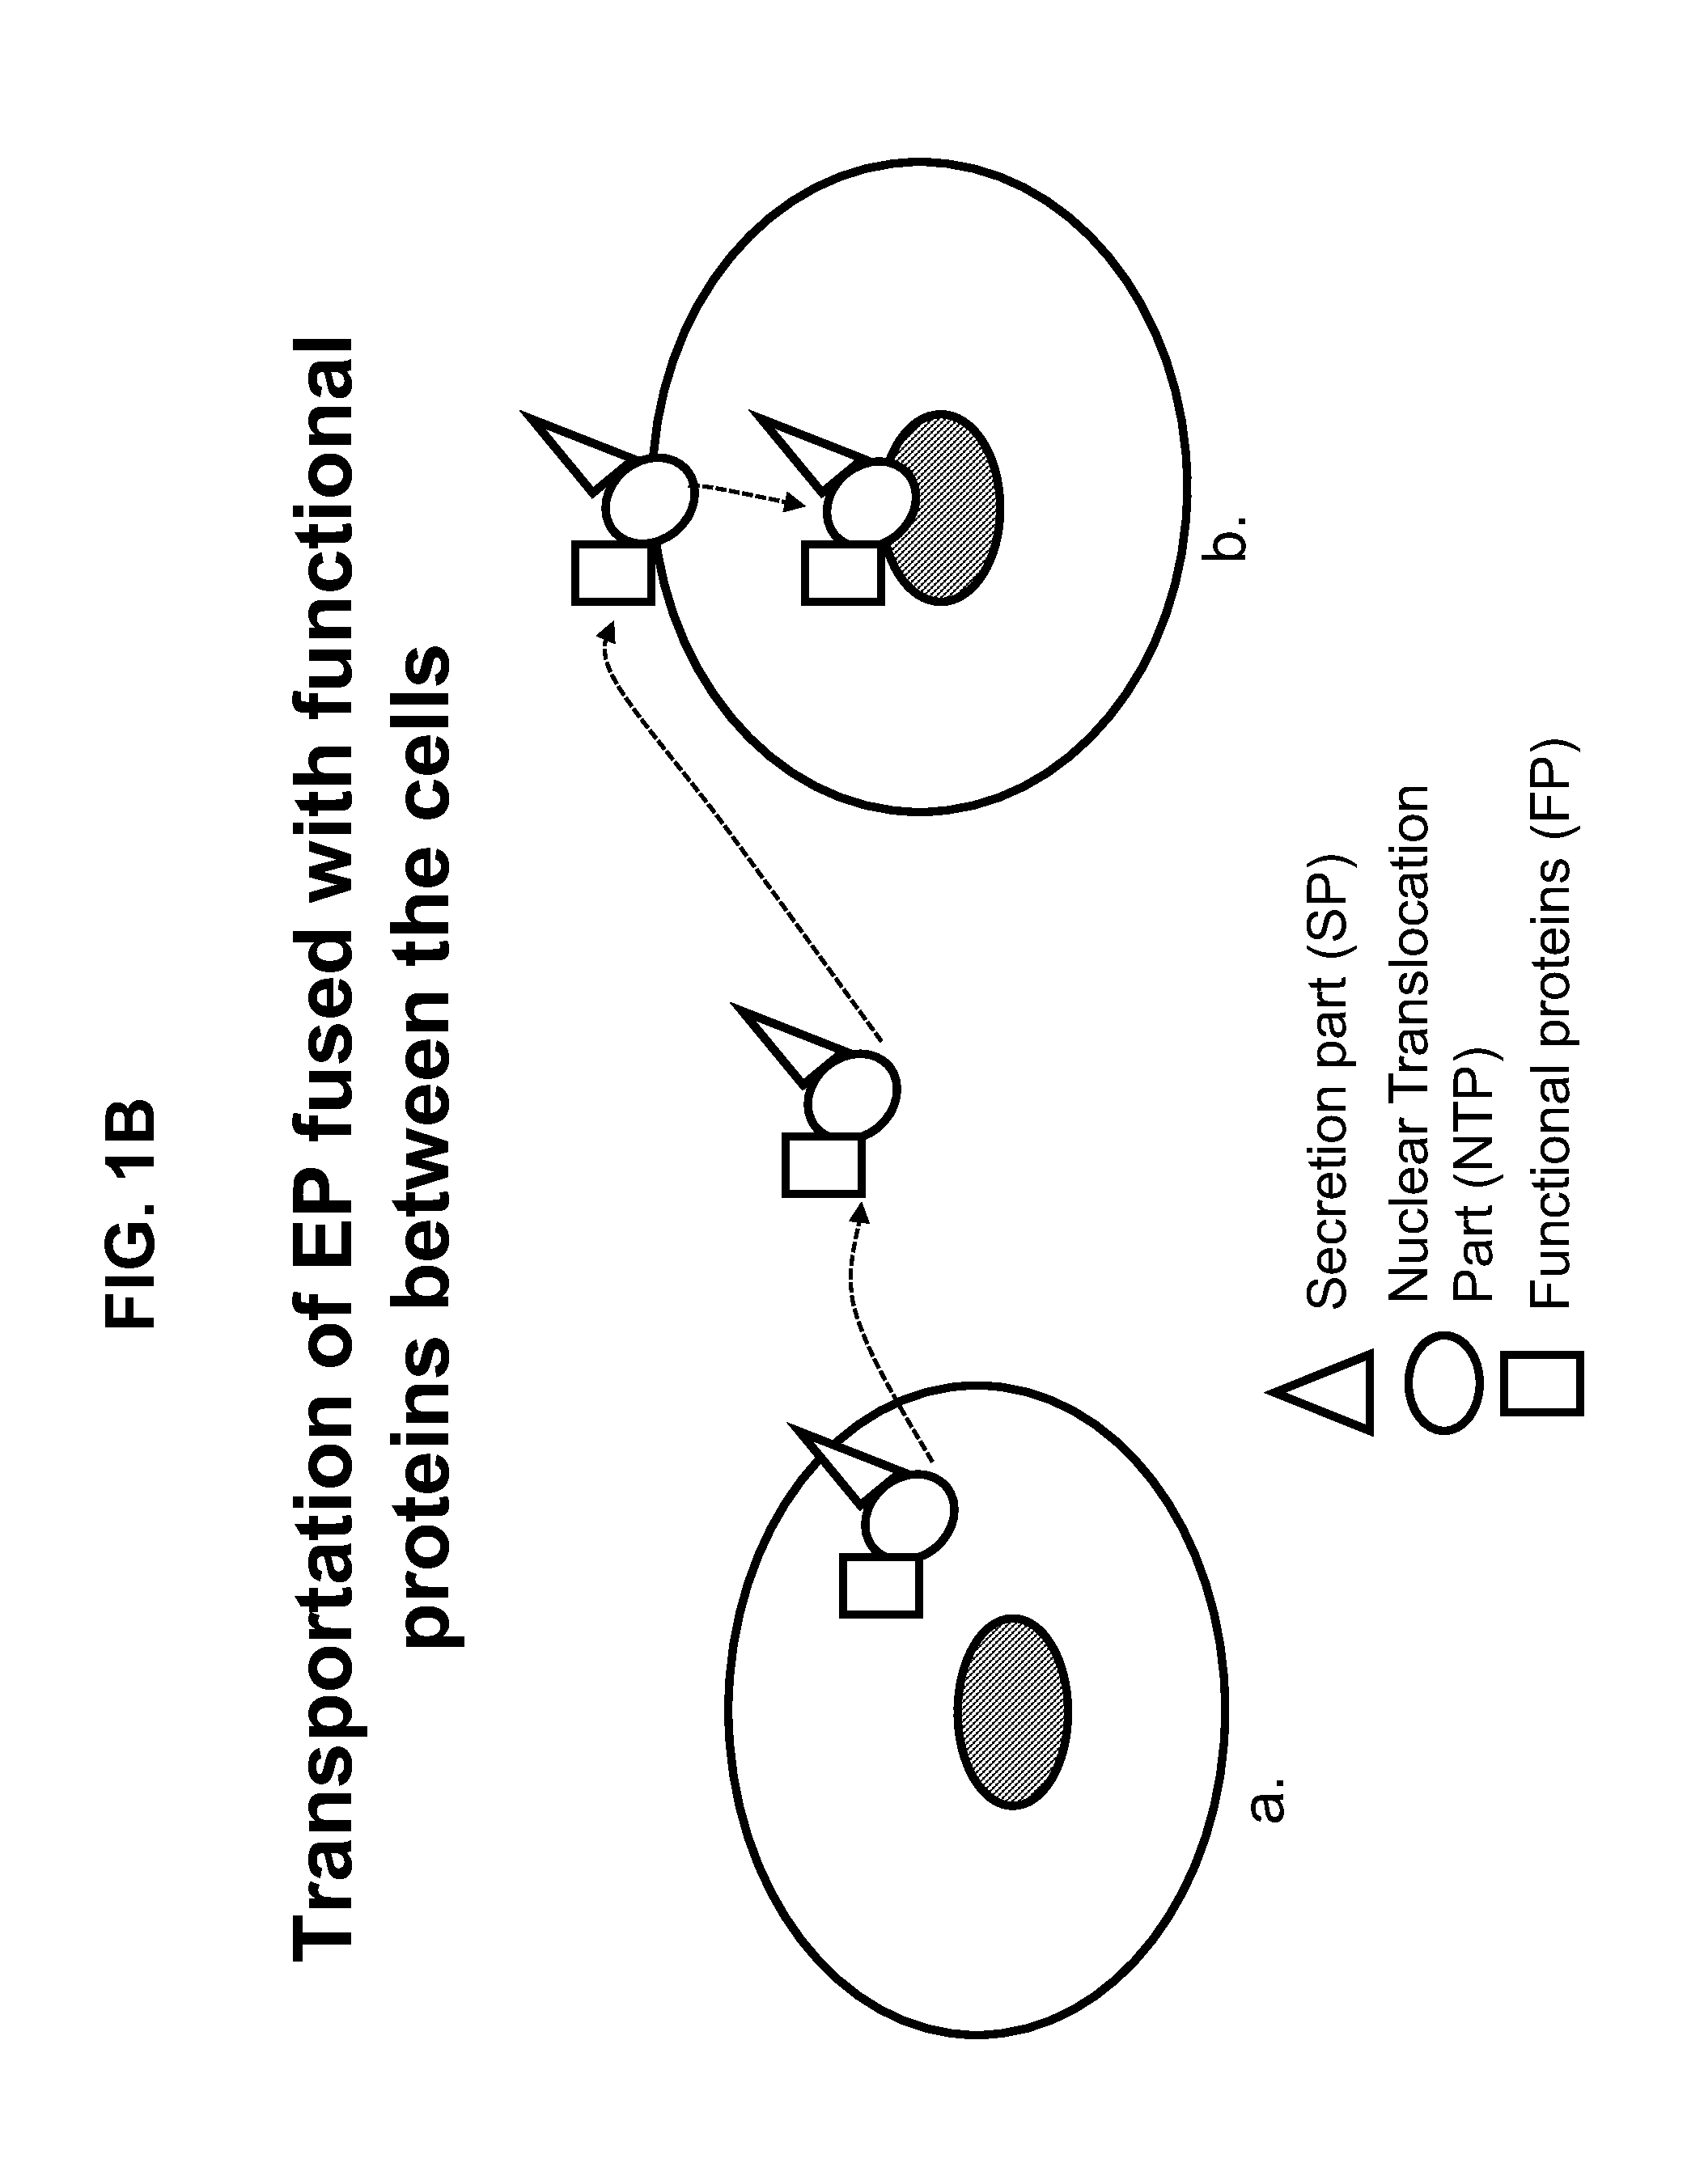 Engineered peptide (EP)-directed protein intercellular delivery system and uses thereof